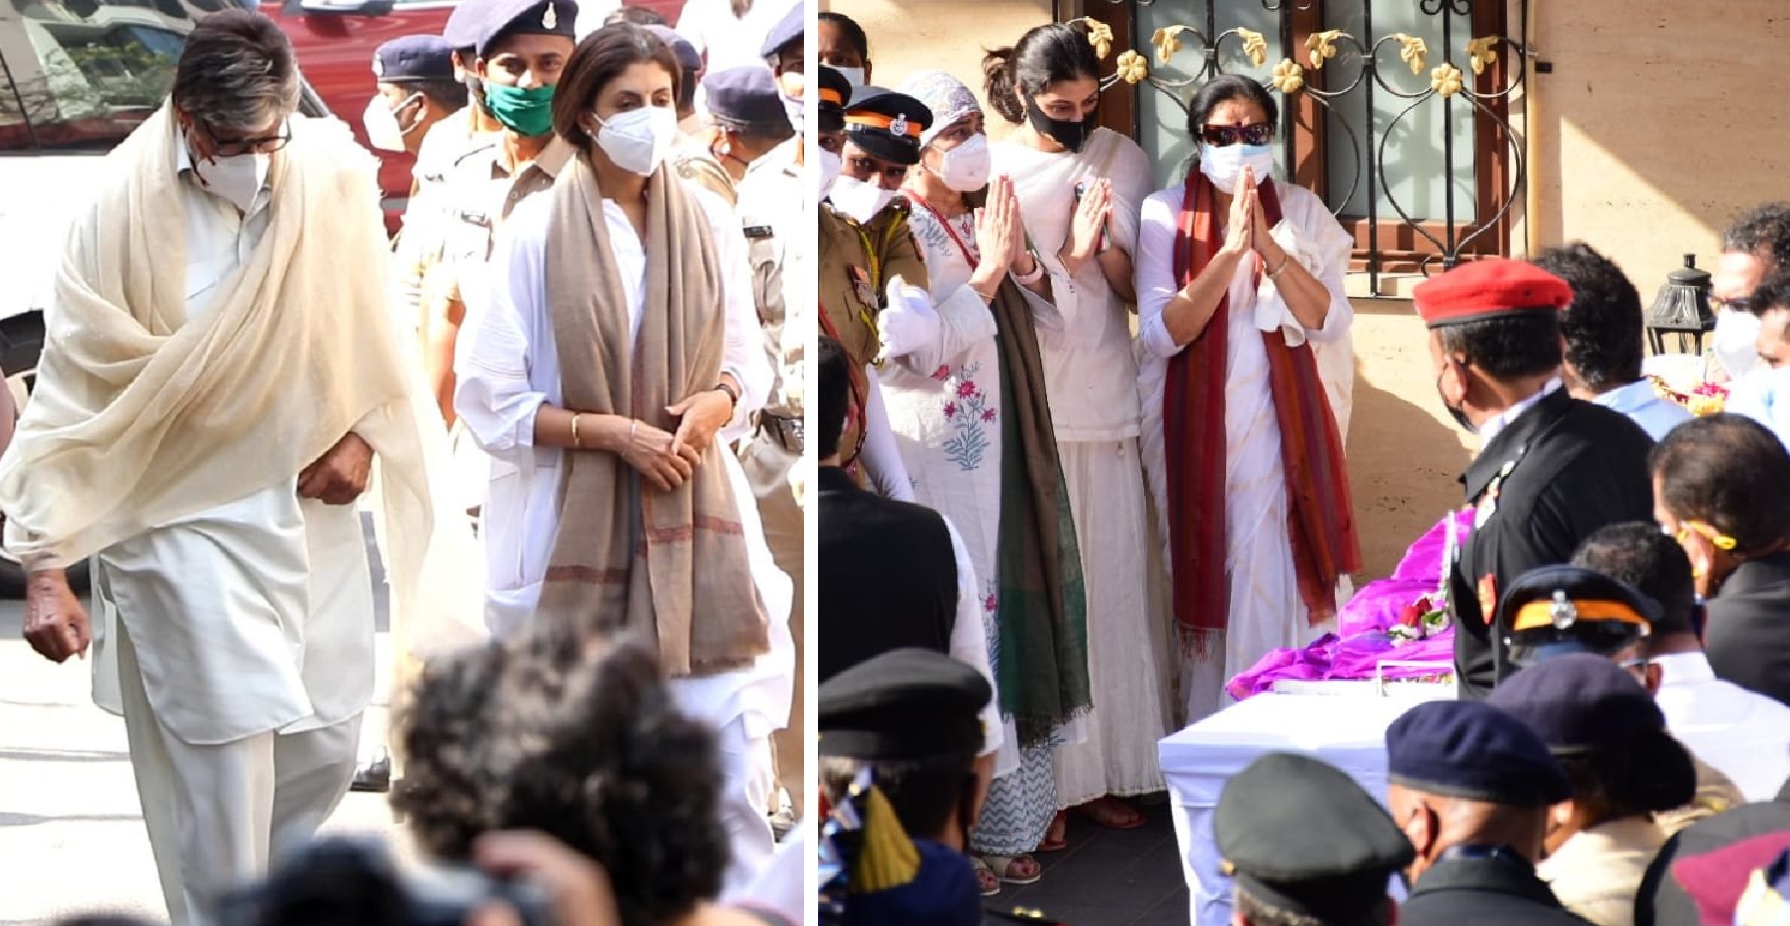 Lata Mangeshkar Funeral: Asha Bhosle Joins Hands In Respect, Amitabh Bachchan Arrives At Her House